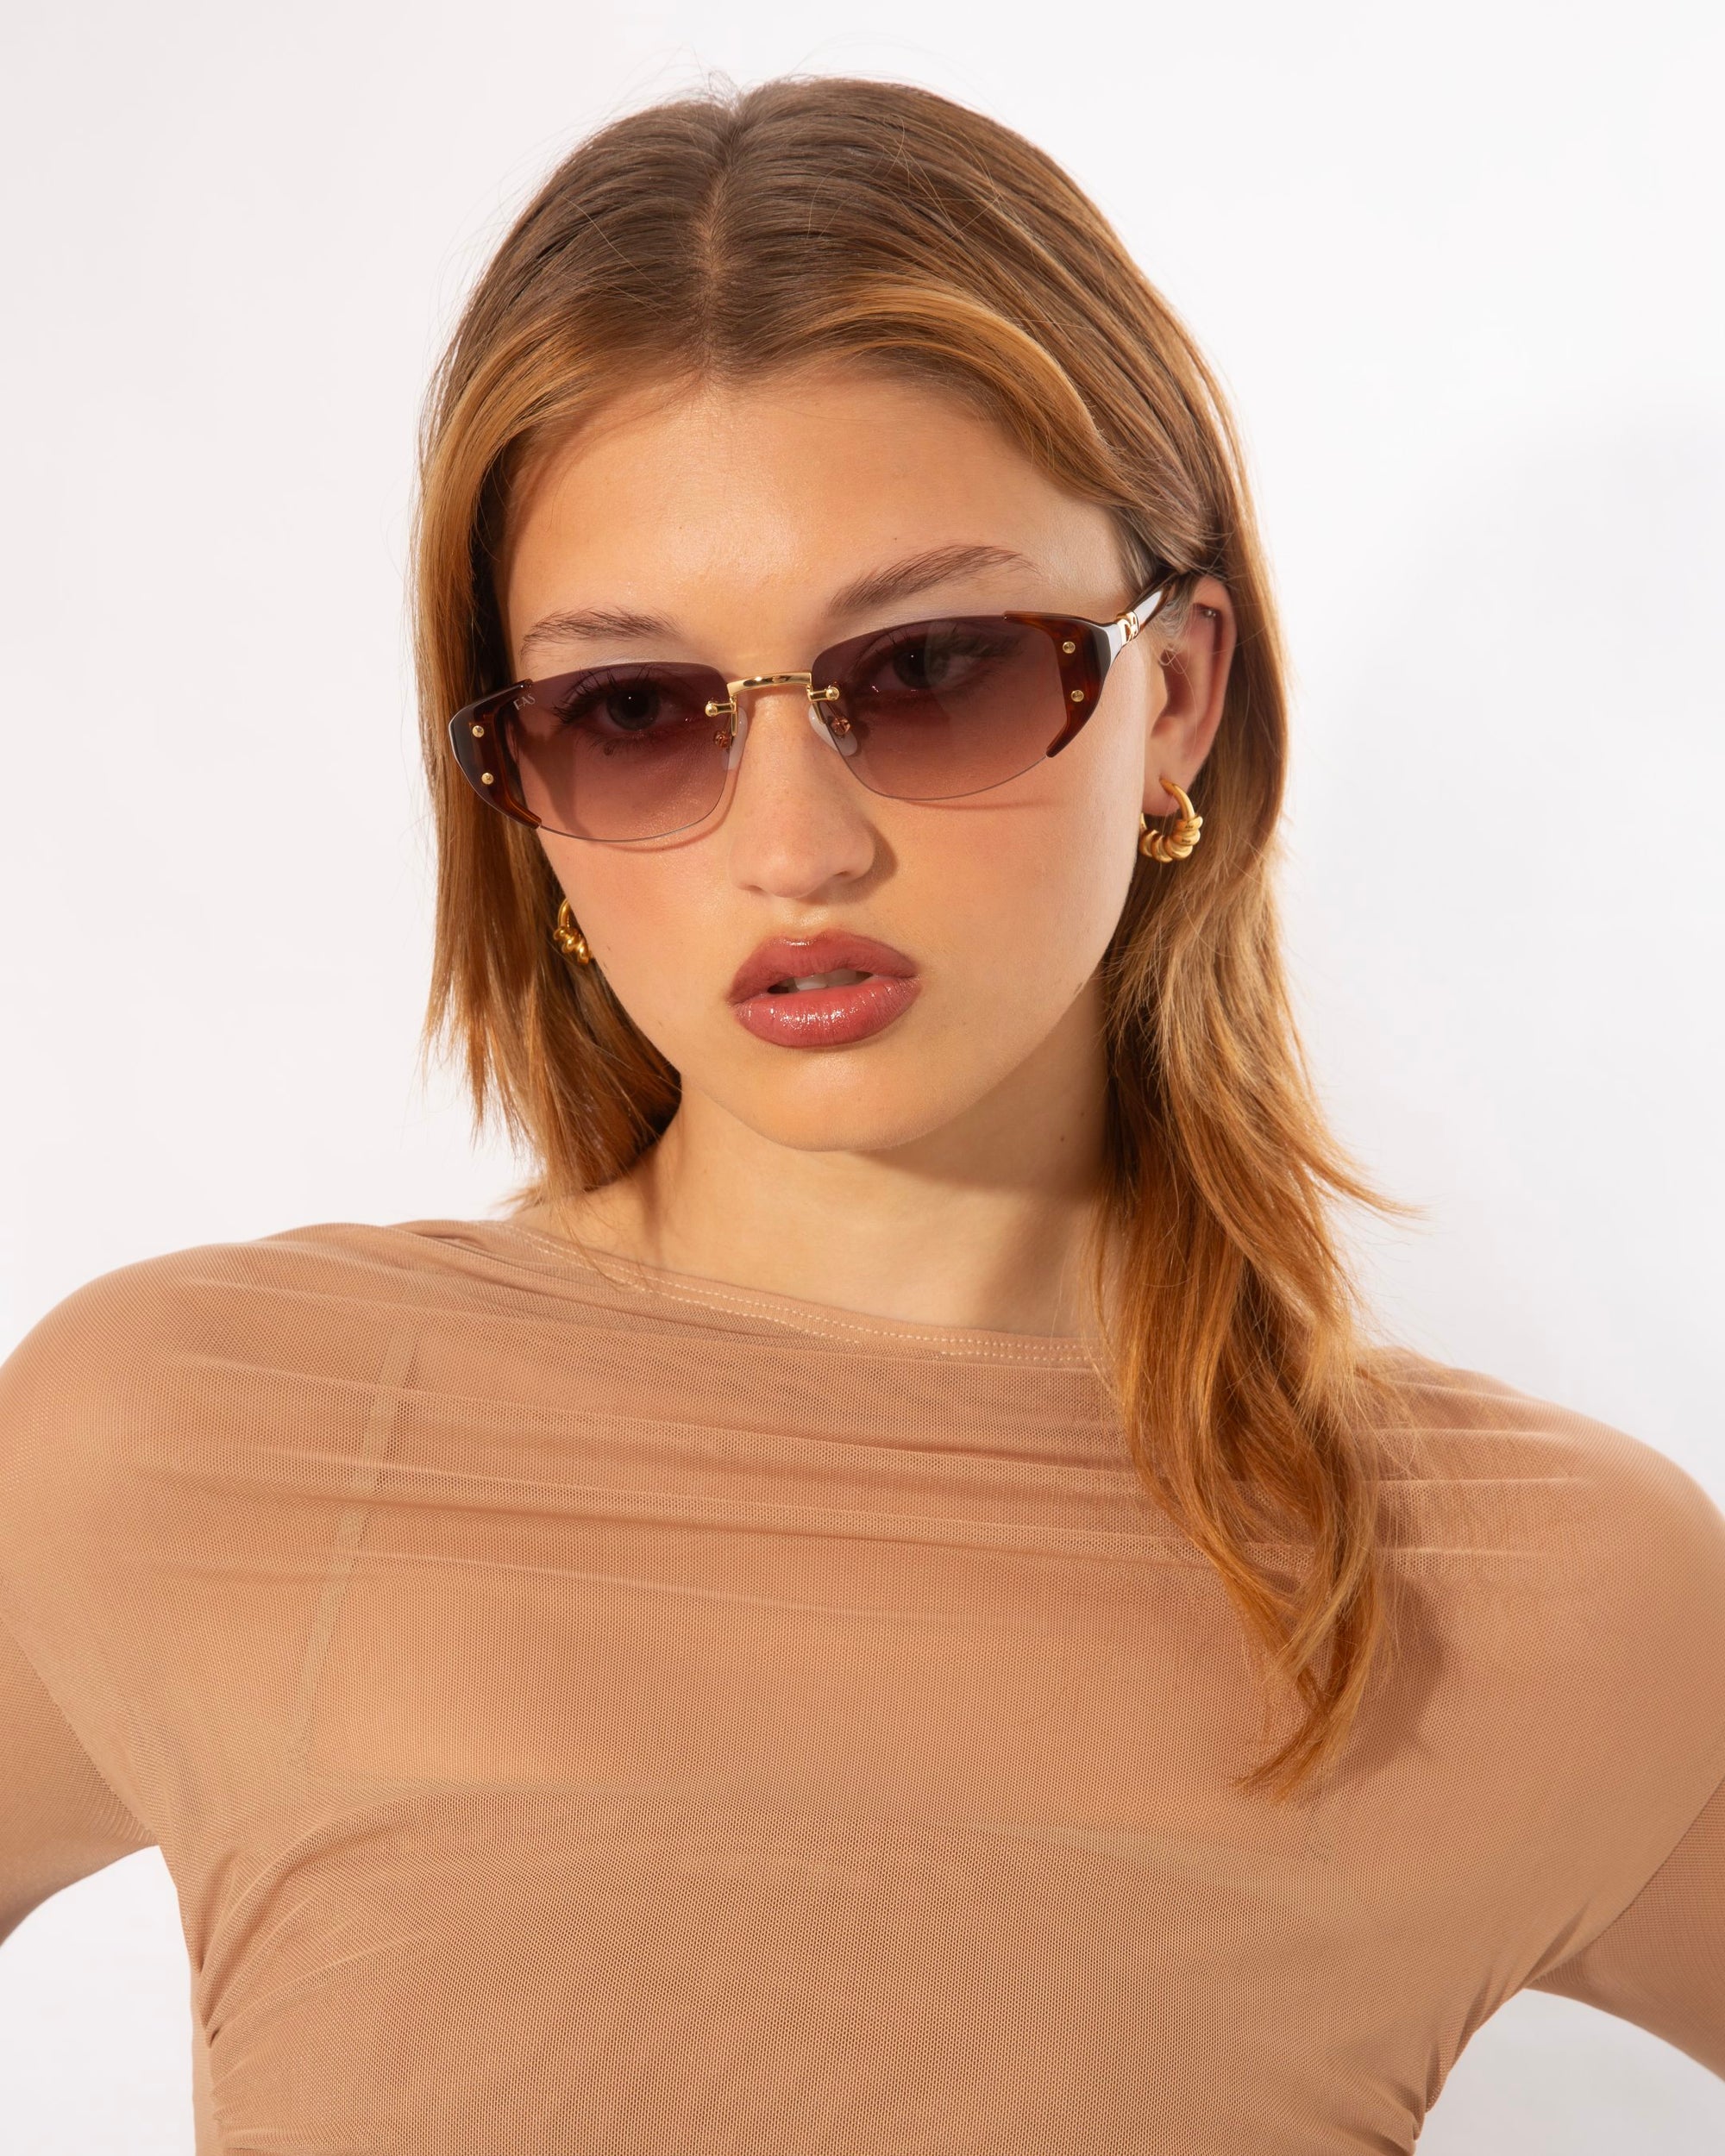 A person with long, light brown hair wearing stylish Harbour sunglasses and gold hoop earrings is pictured from the waist up. They are dressed in a sheer, beige top against a plain white background. The retro-inspired design of the For Art&#39;s Sake® Harbour sunglasses adds a modern twist to their look.